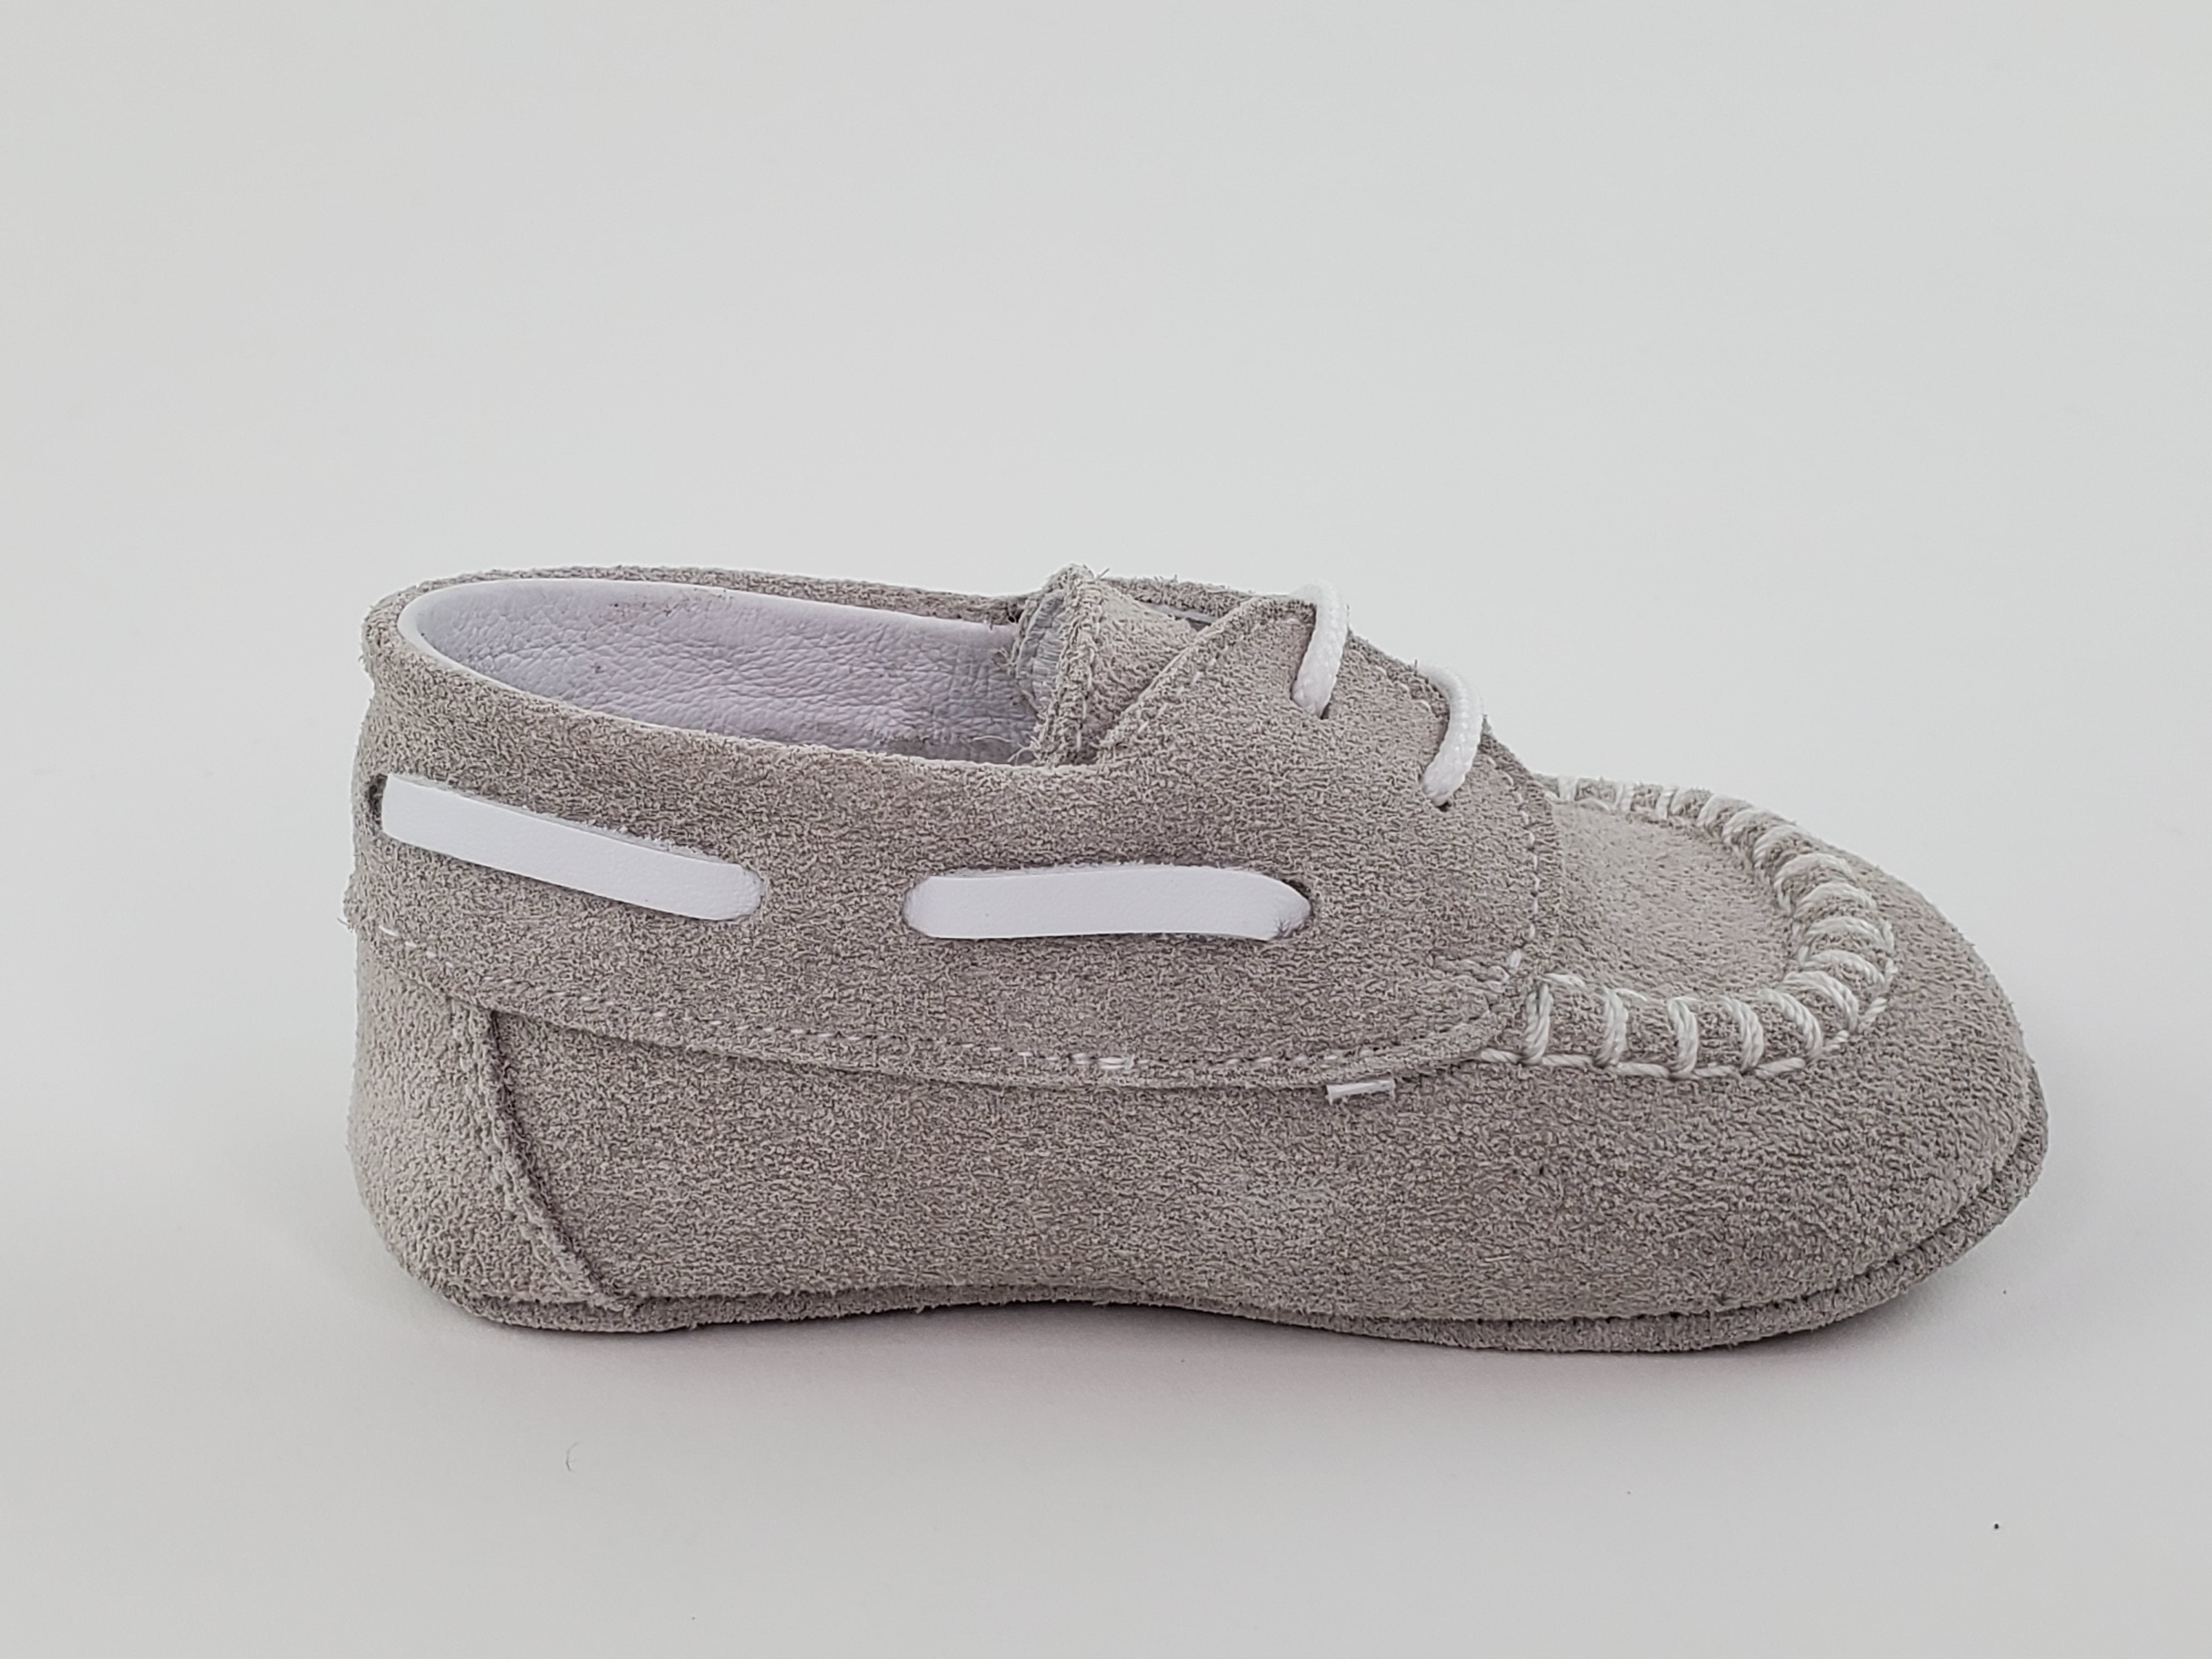 Pearl Suede and Napa White Moc Toe Pre-walker Shoes-Toddler Boy Shoes Boys Shoes Alfa Baby Boutique 